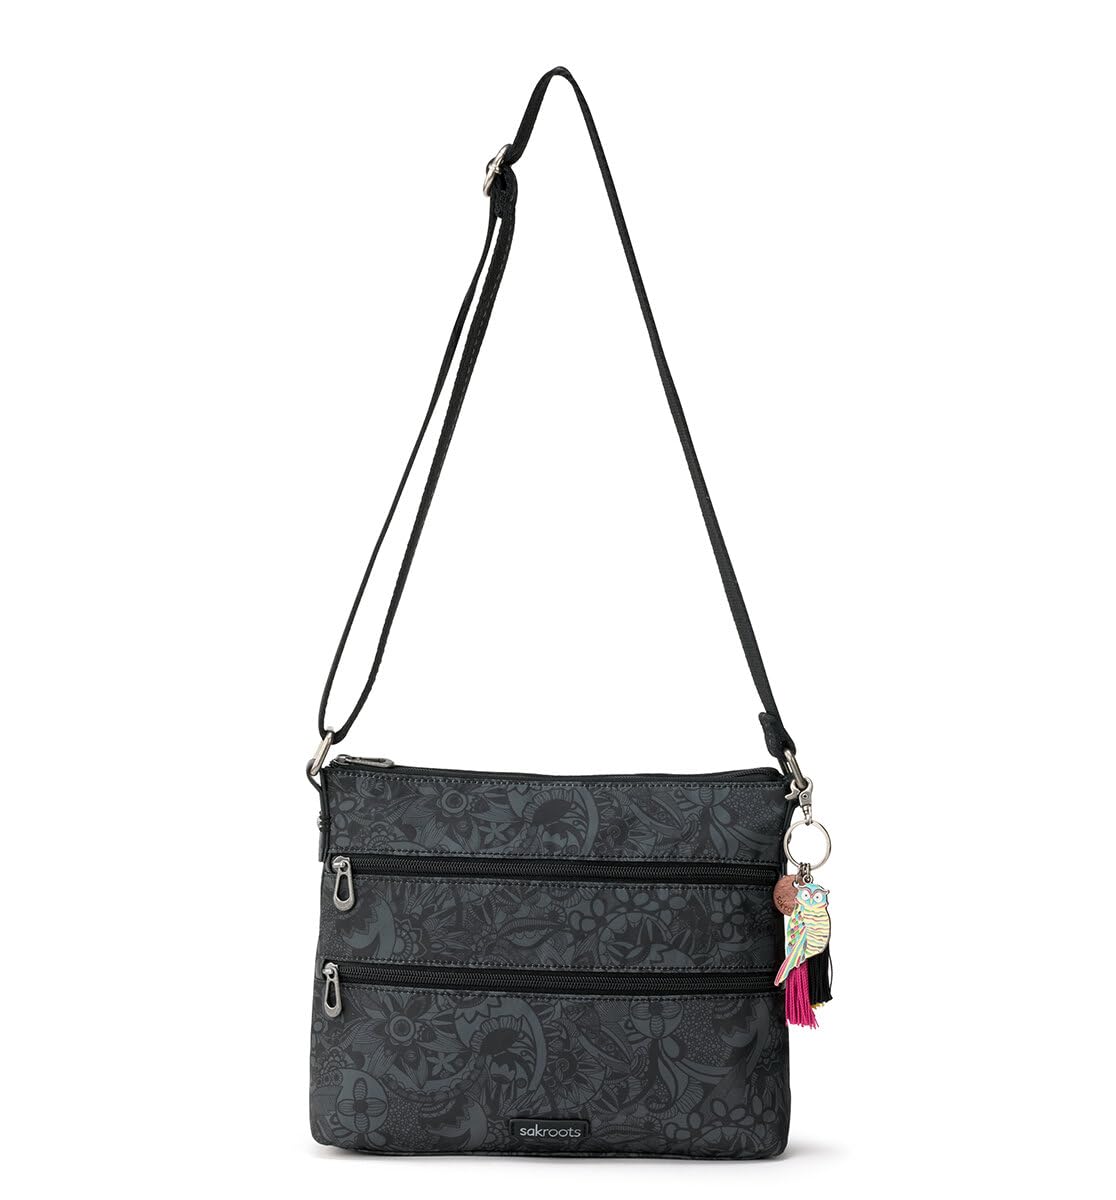 Sakroots Women's Bag in Eco-Twill, Multifunctional Purse with Adjustable Strap & Zipper Pockets, Sustainable & Durable Design